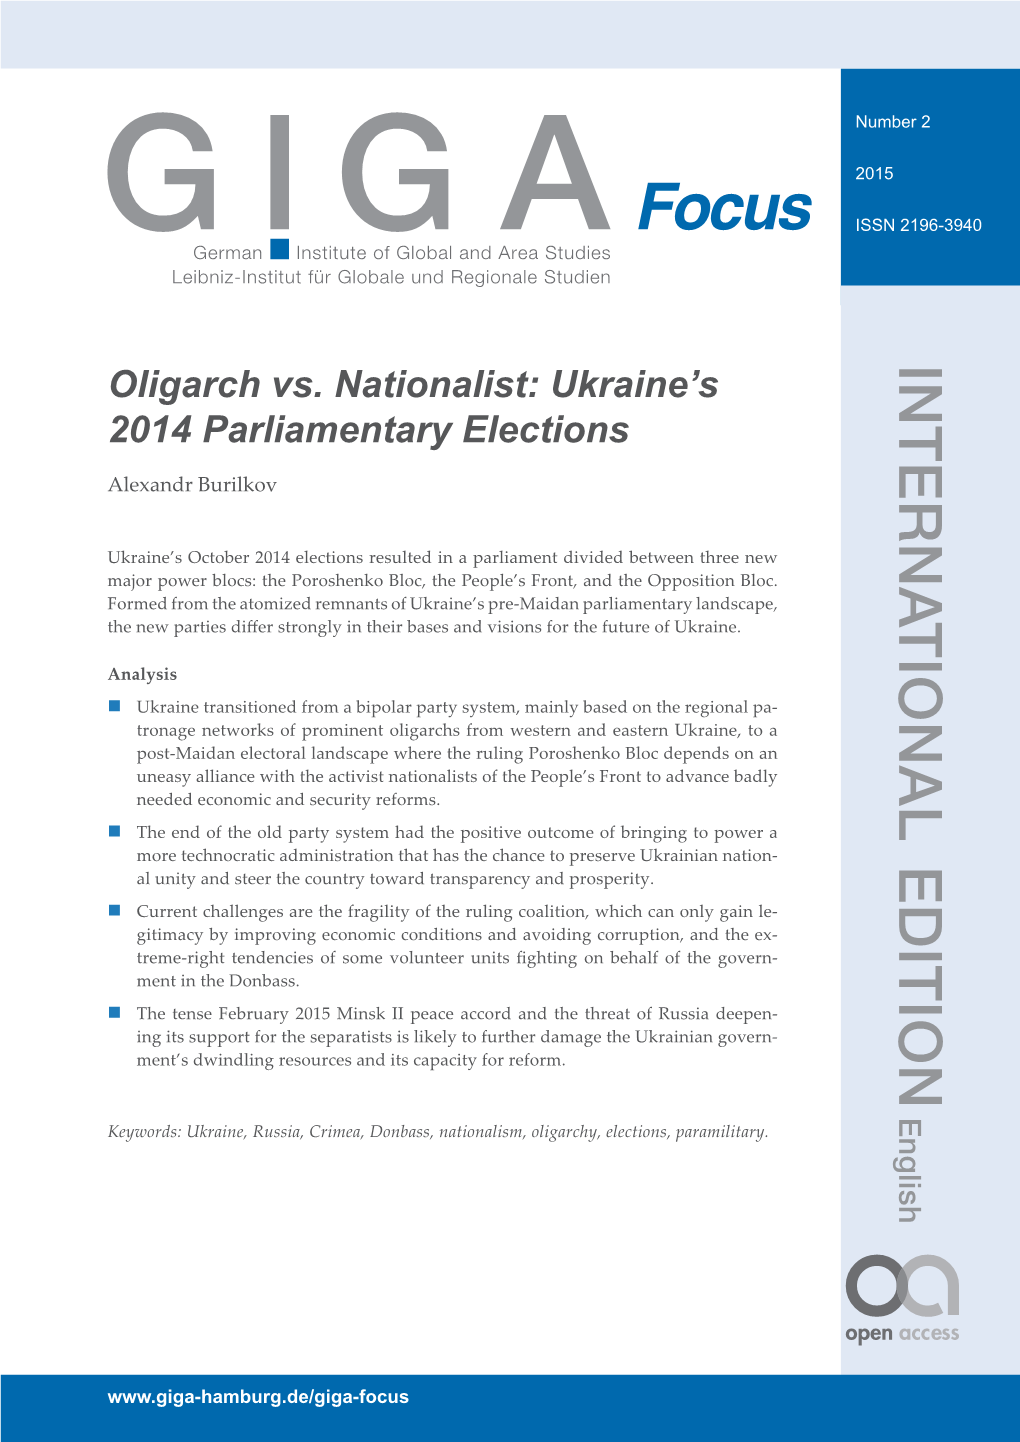 Oligarch Vs Nationalist: Ukraine's 2014 Parliamentary Elections